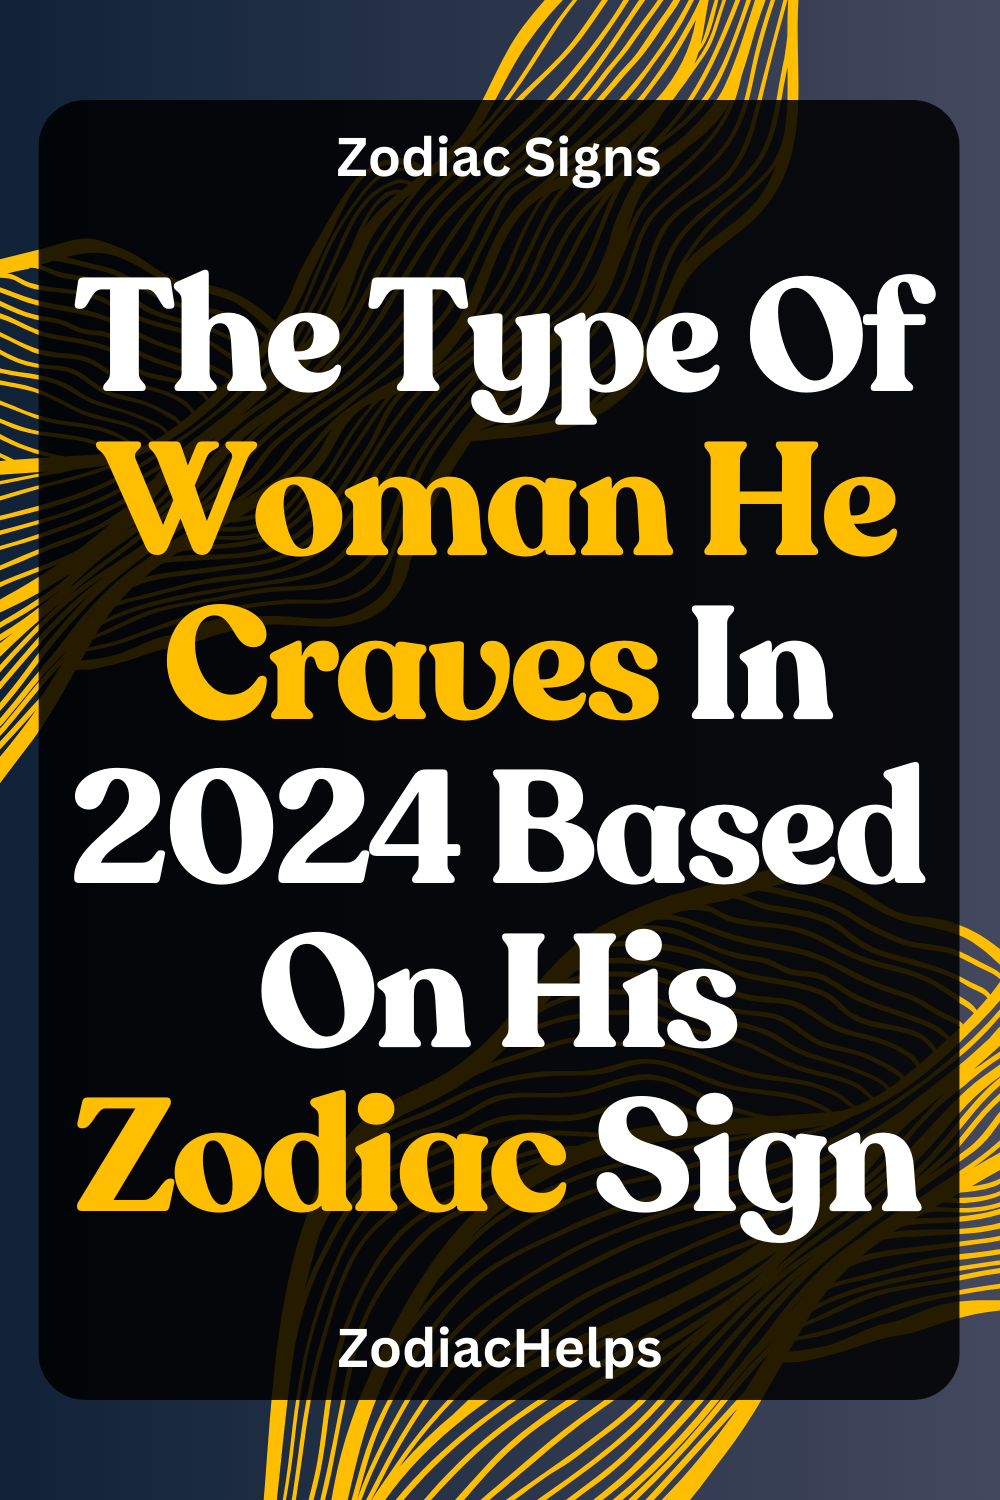 The Type Of Woman He Craves In 2024 Based On His Zodiac Sign